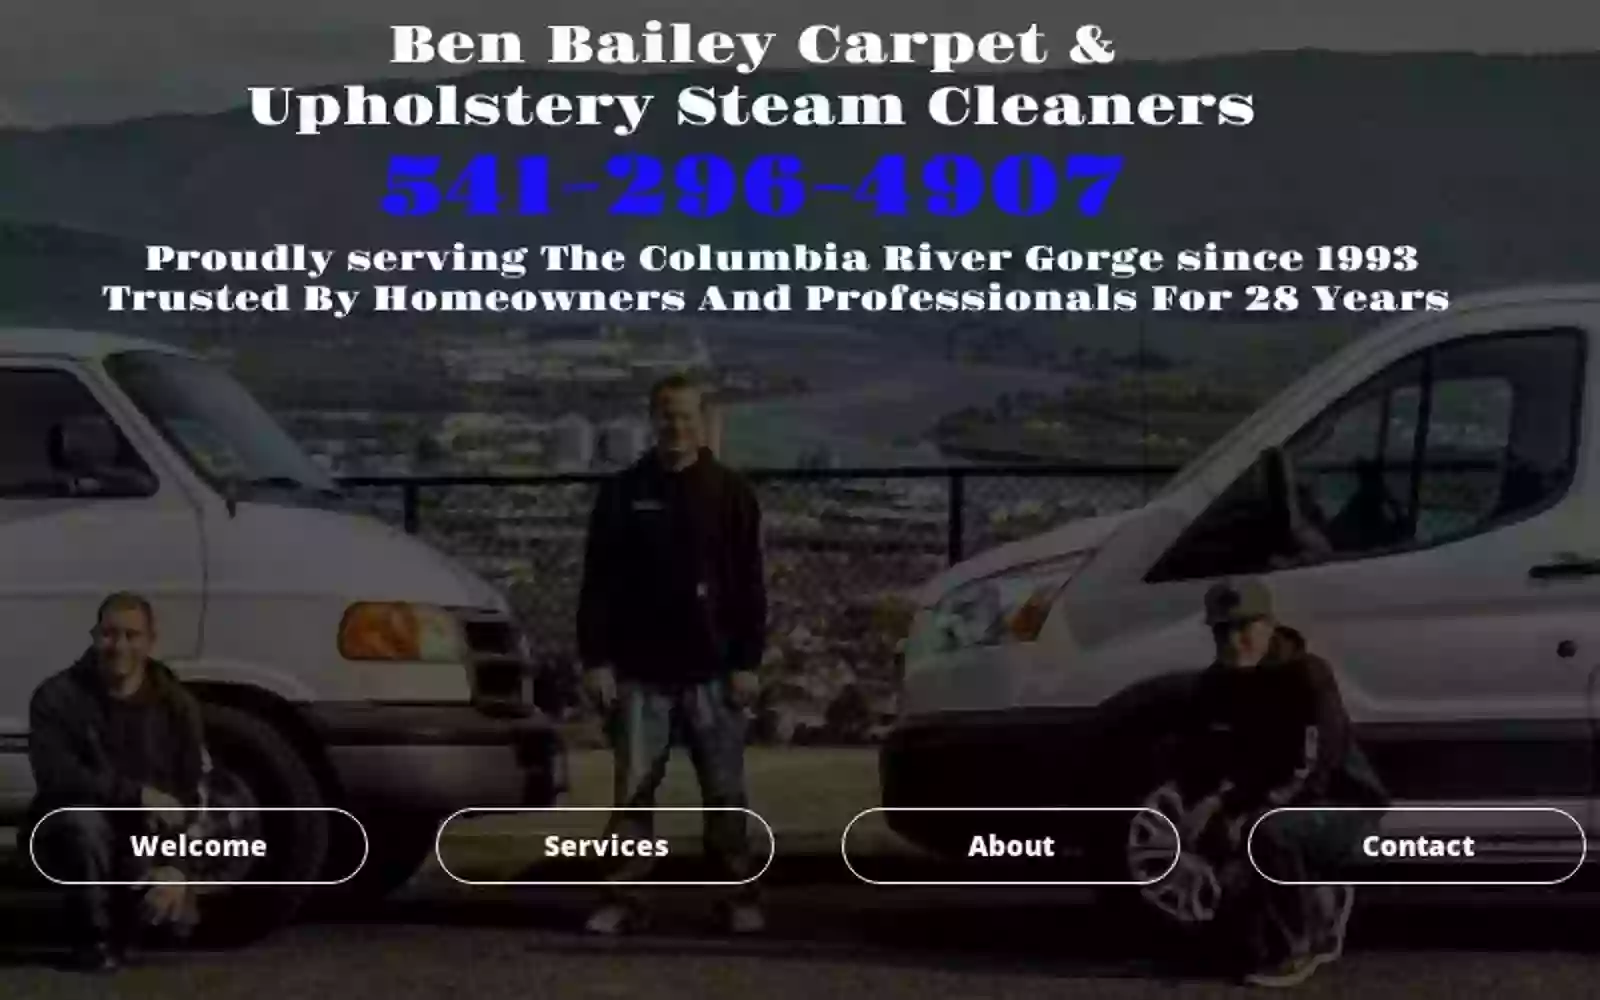 Ben Bailey Carpet & Upholstery Steam Cleaners